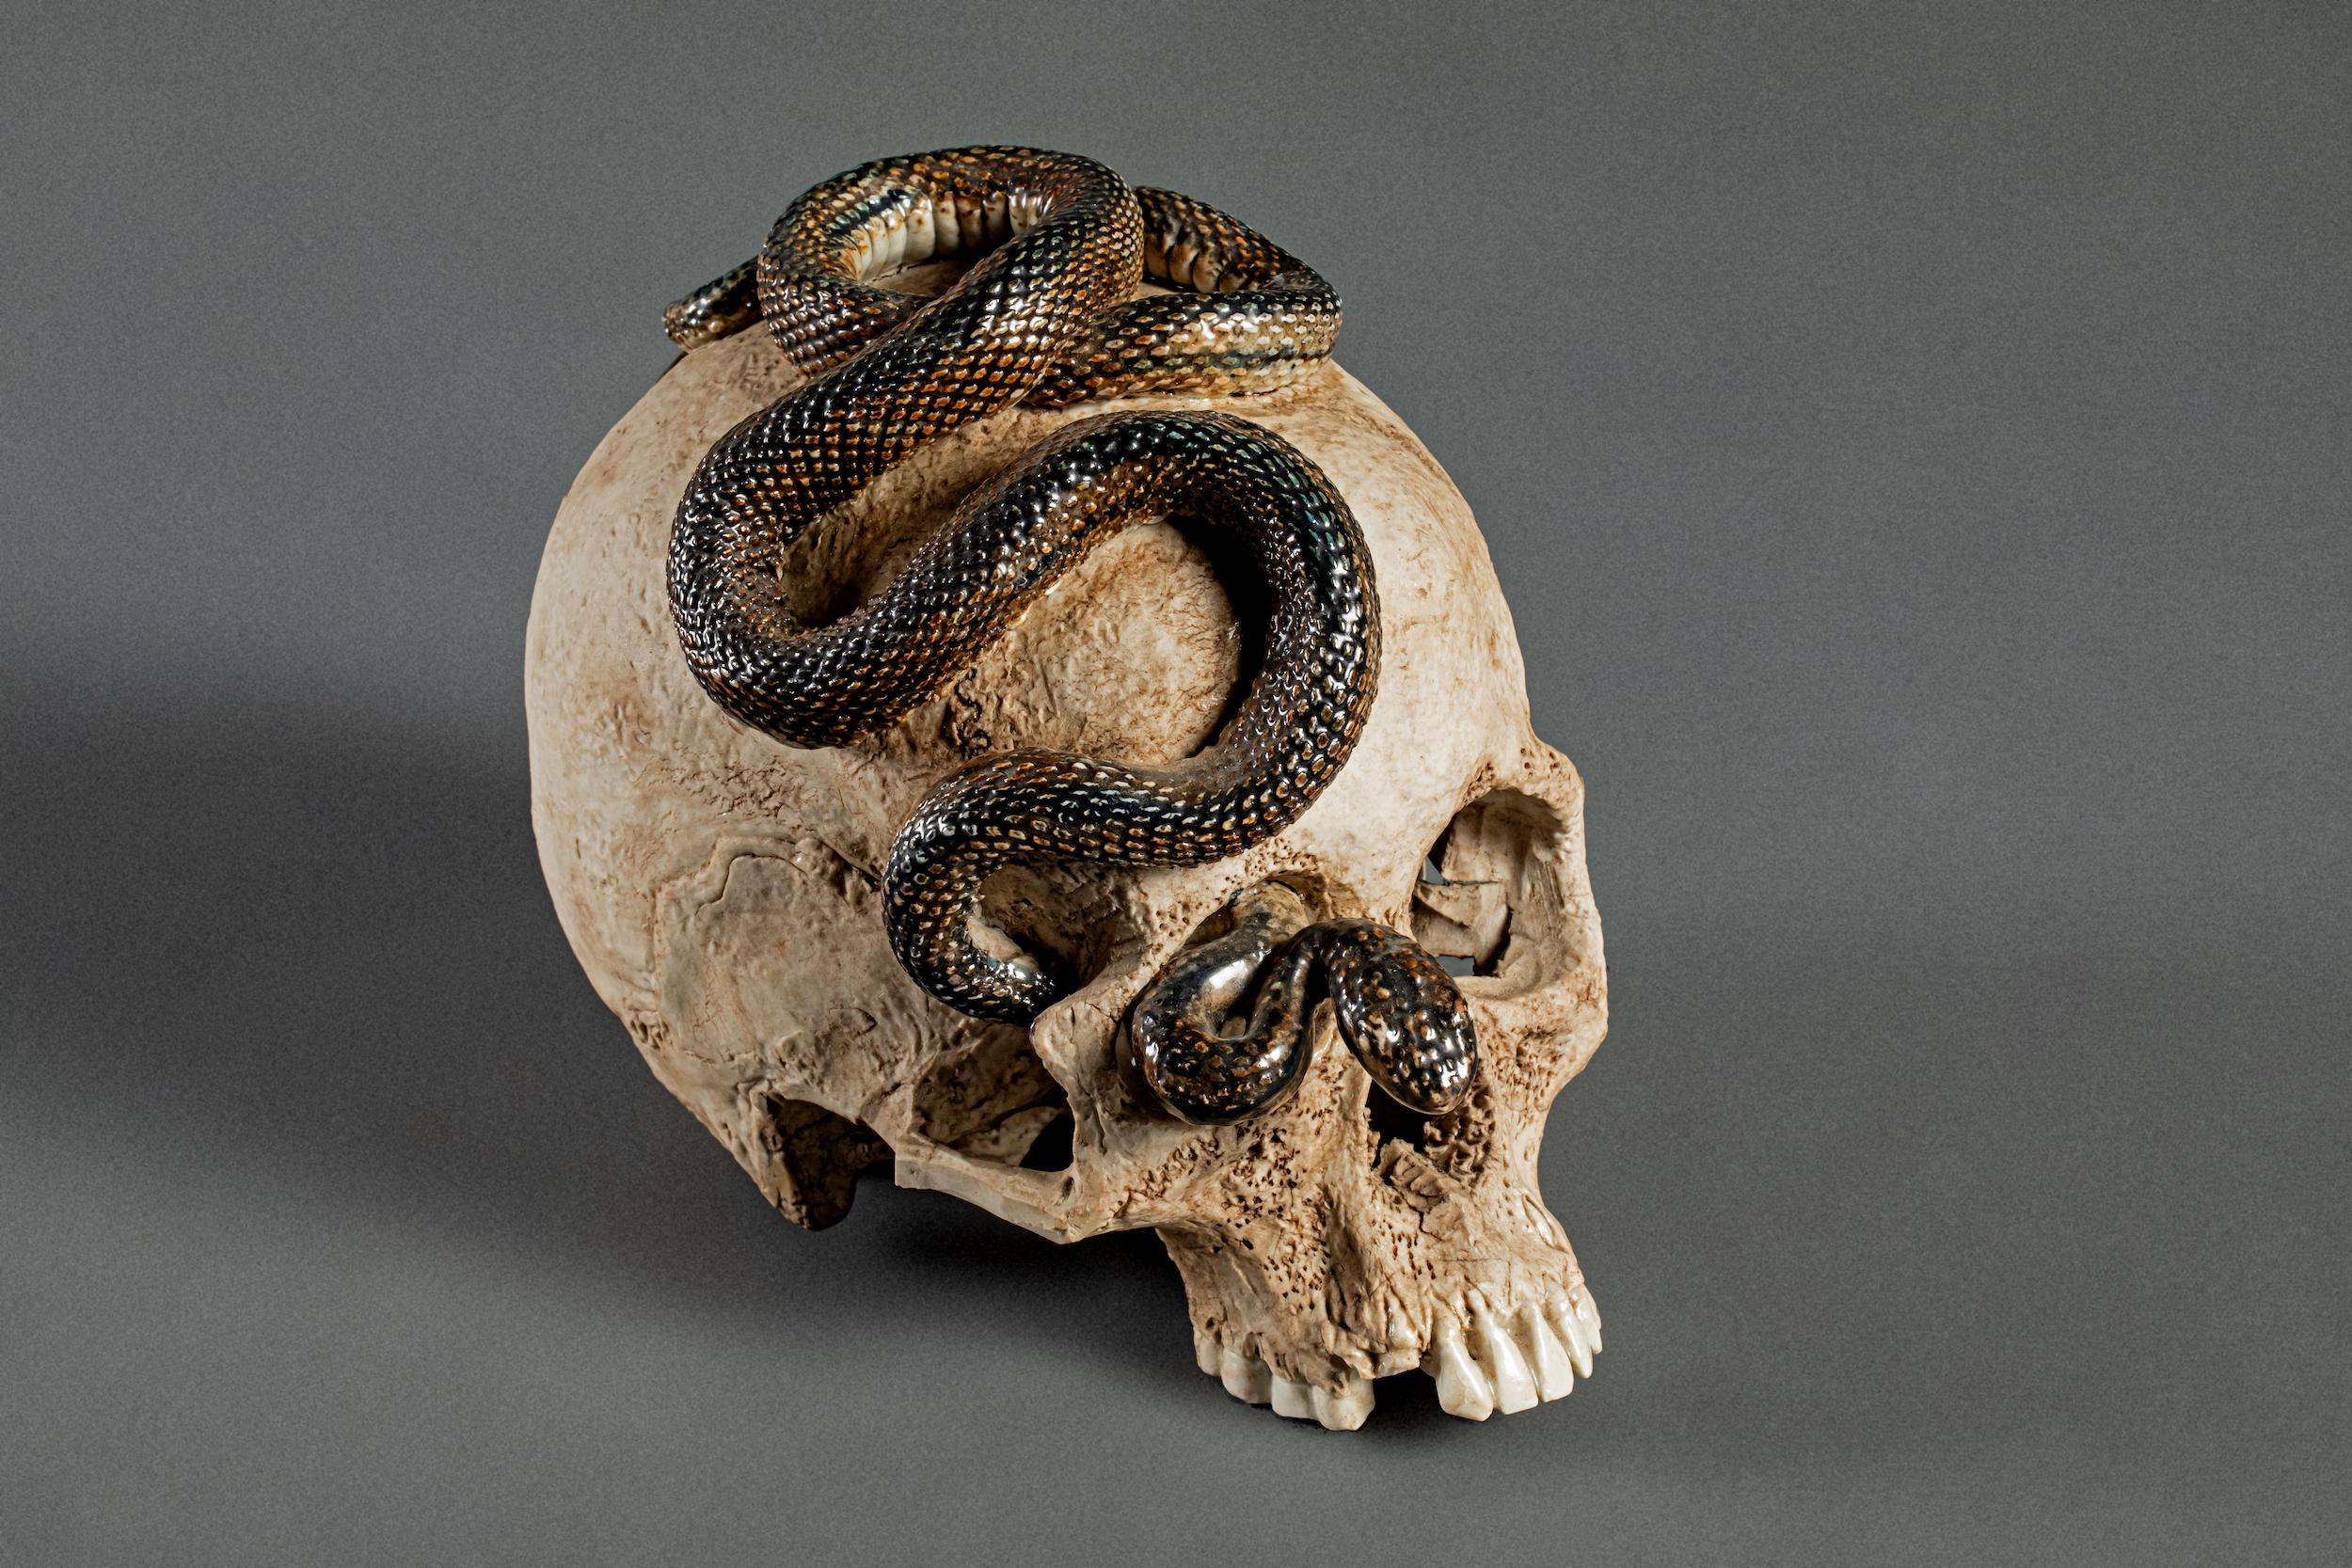 Japanese Ceramic Form of a Human Skull with a Snake For Sale 2